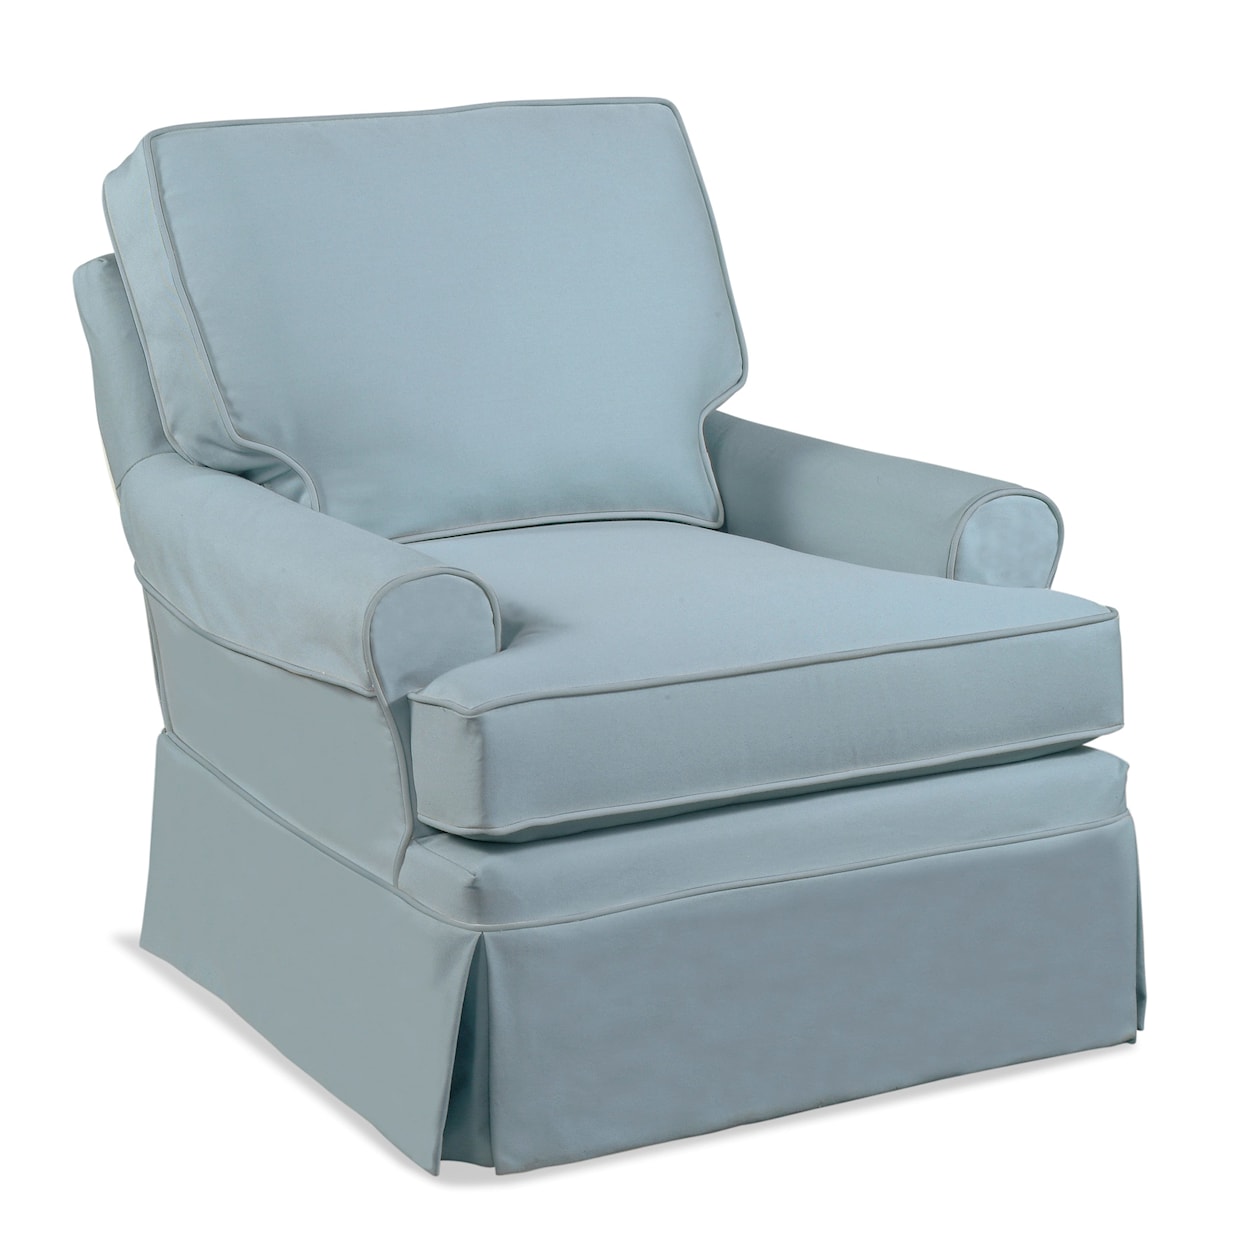 Braxton Culler Belmont Swivel Glider with Slipcover